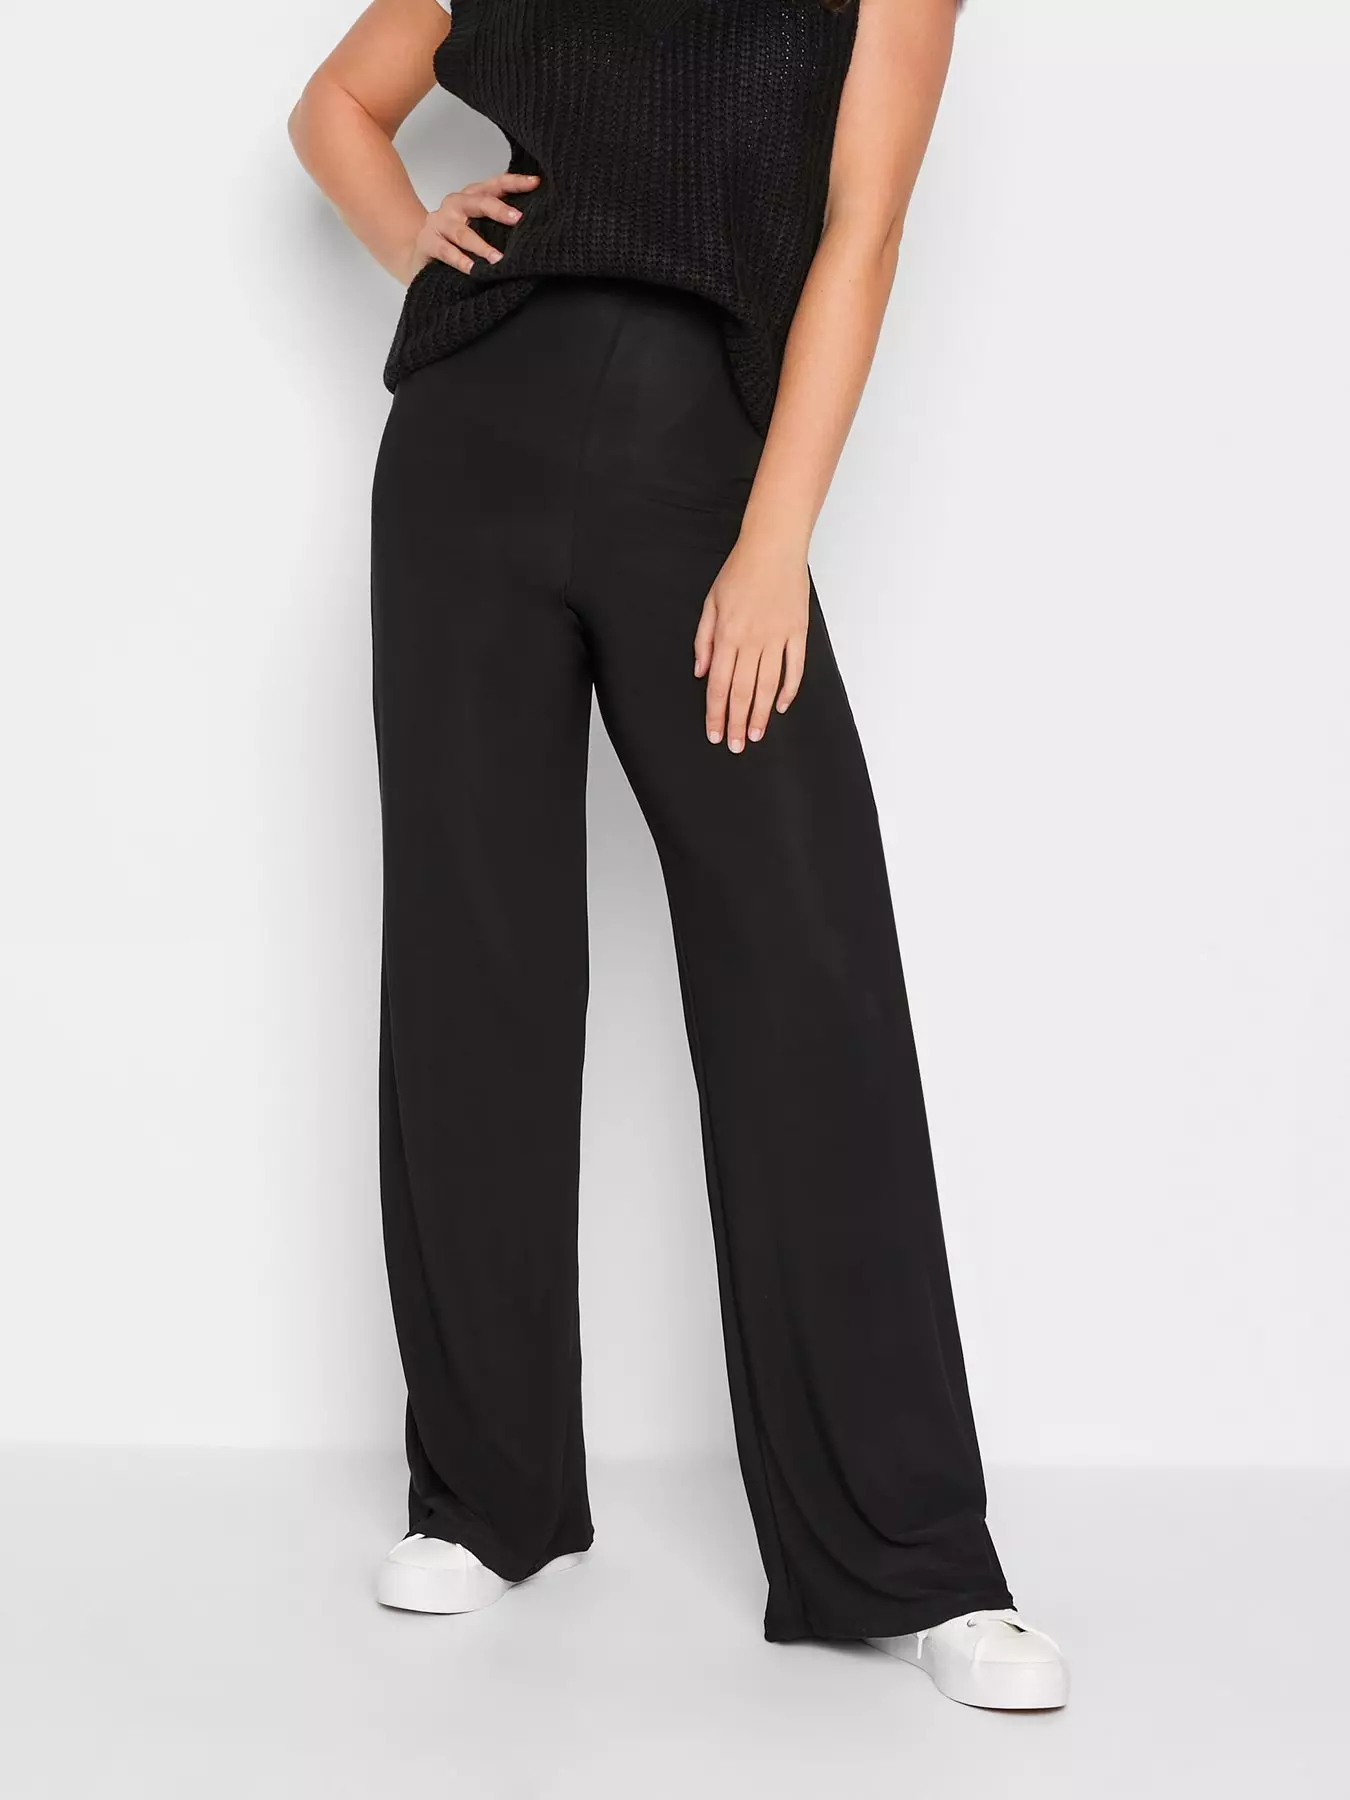 Long Tall Sally Flare Jeans